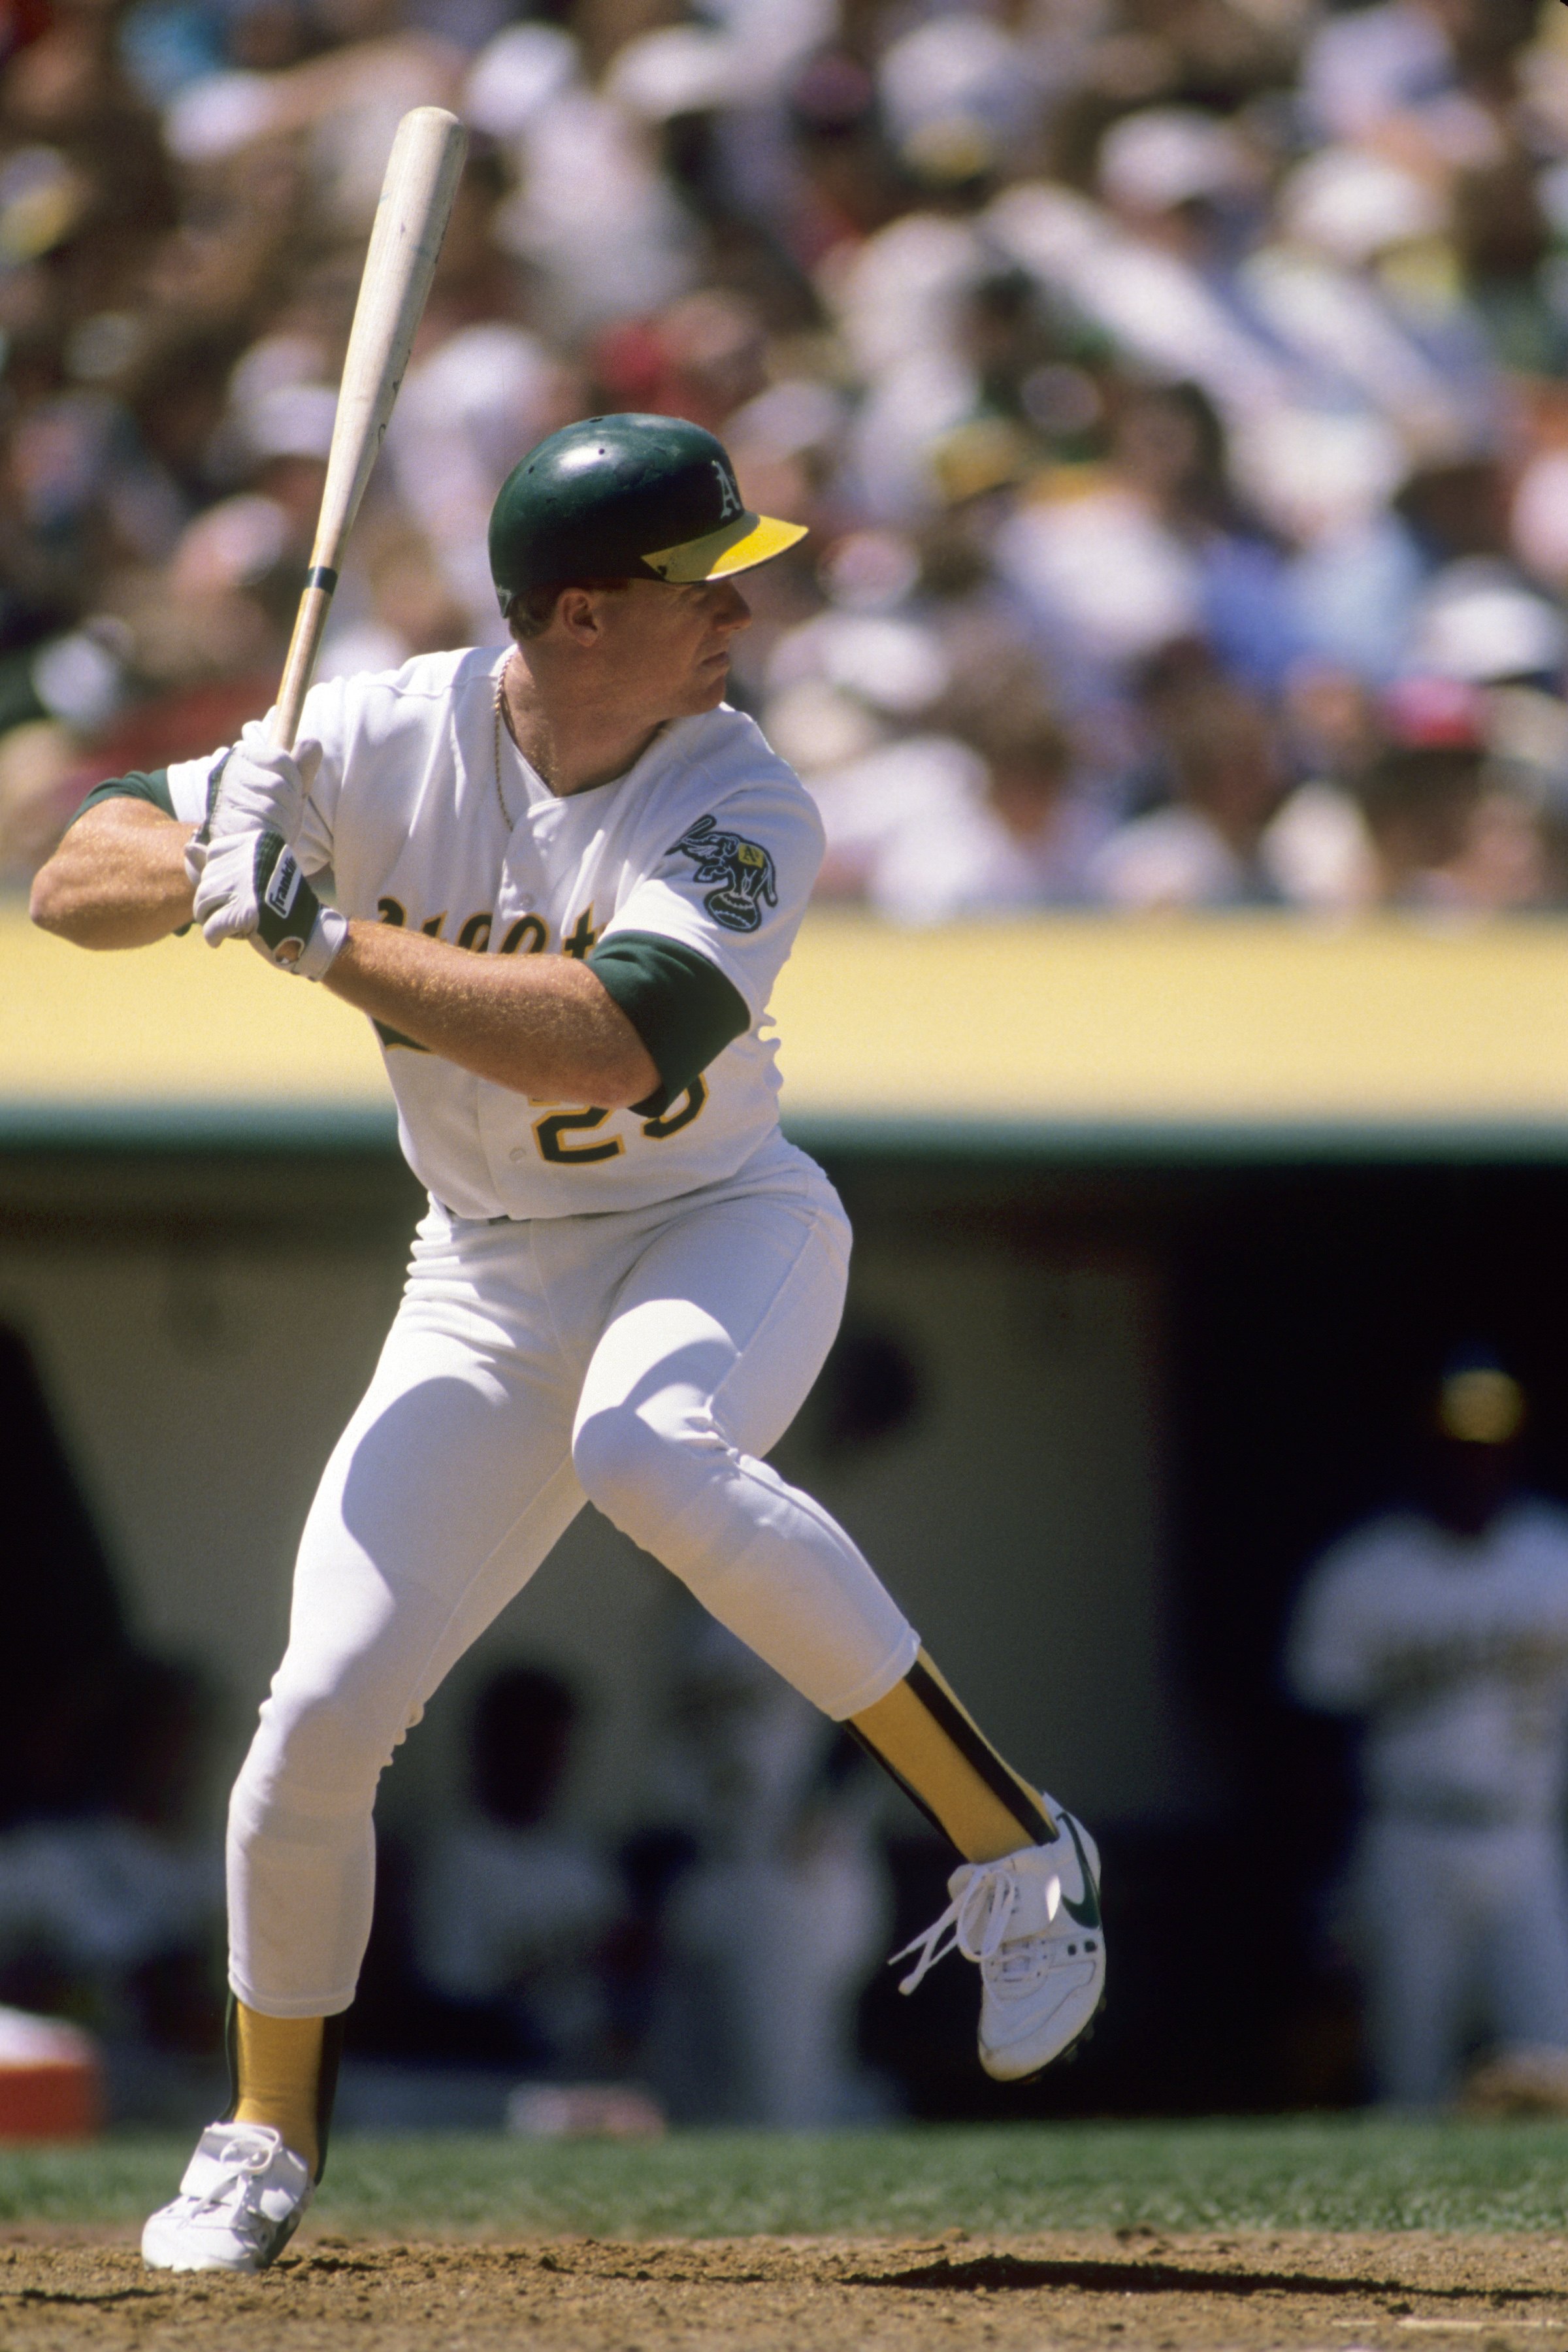 The Top 25 Oakland Athletics of All Time